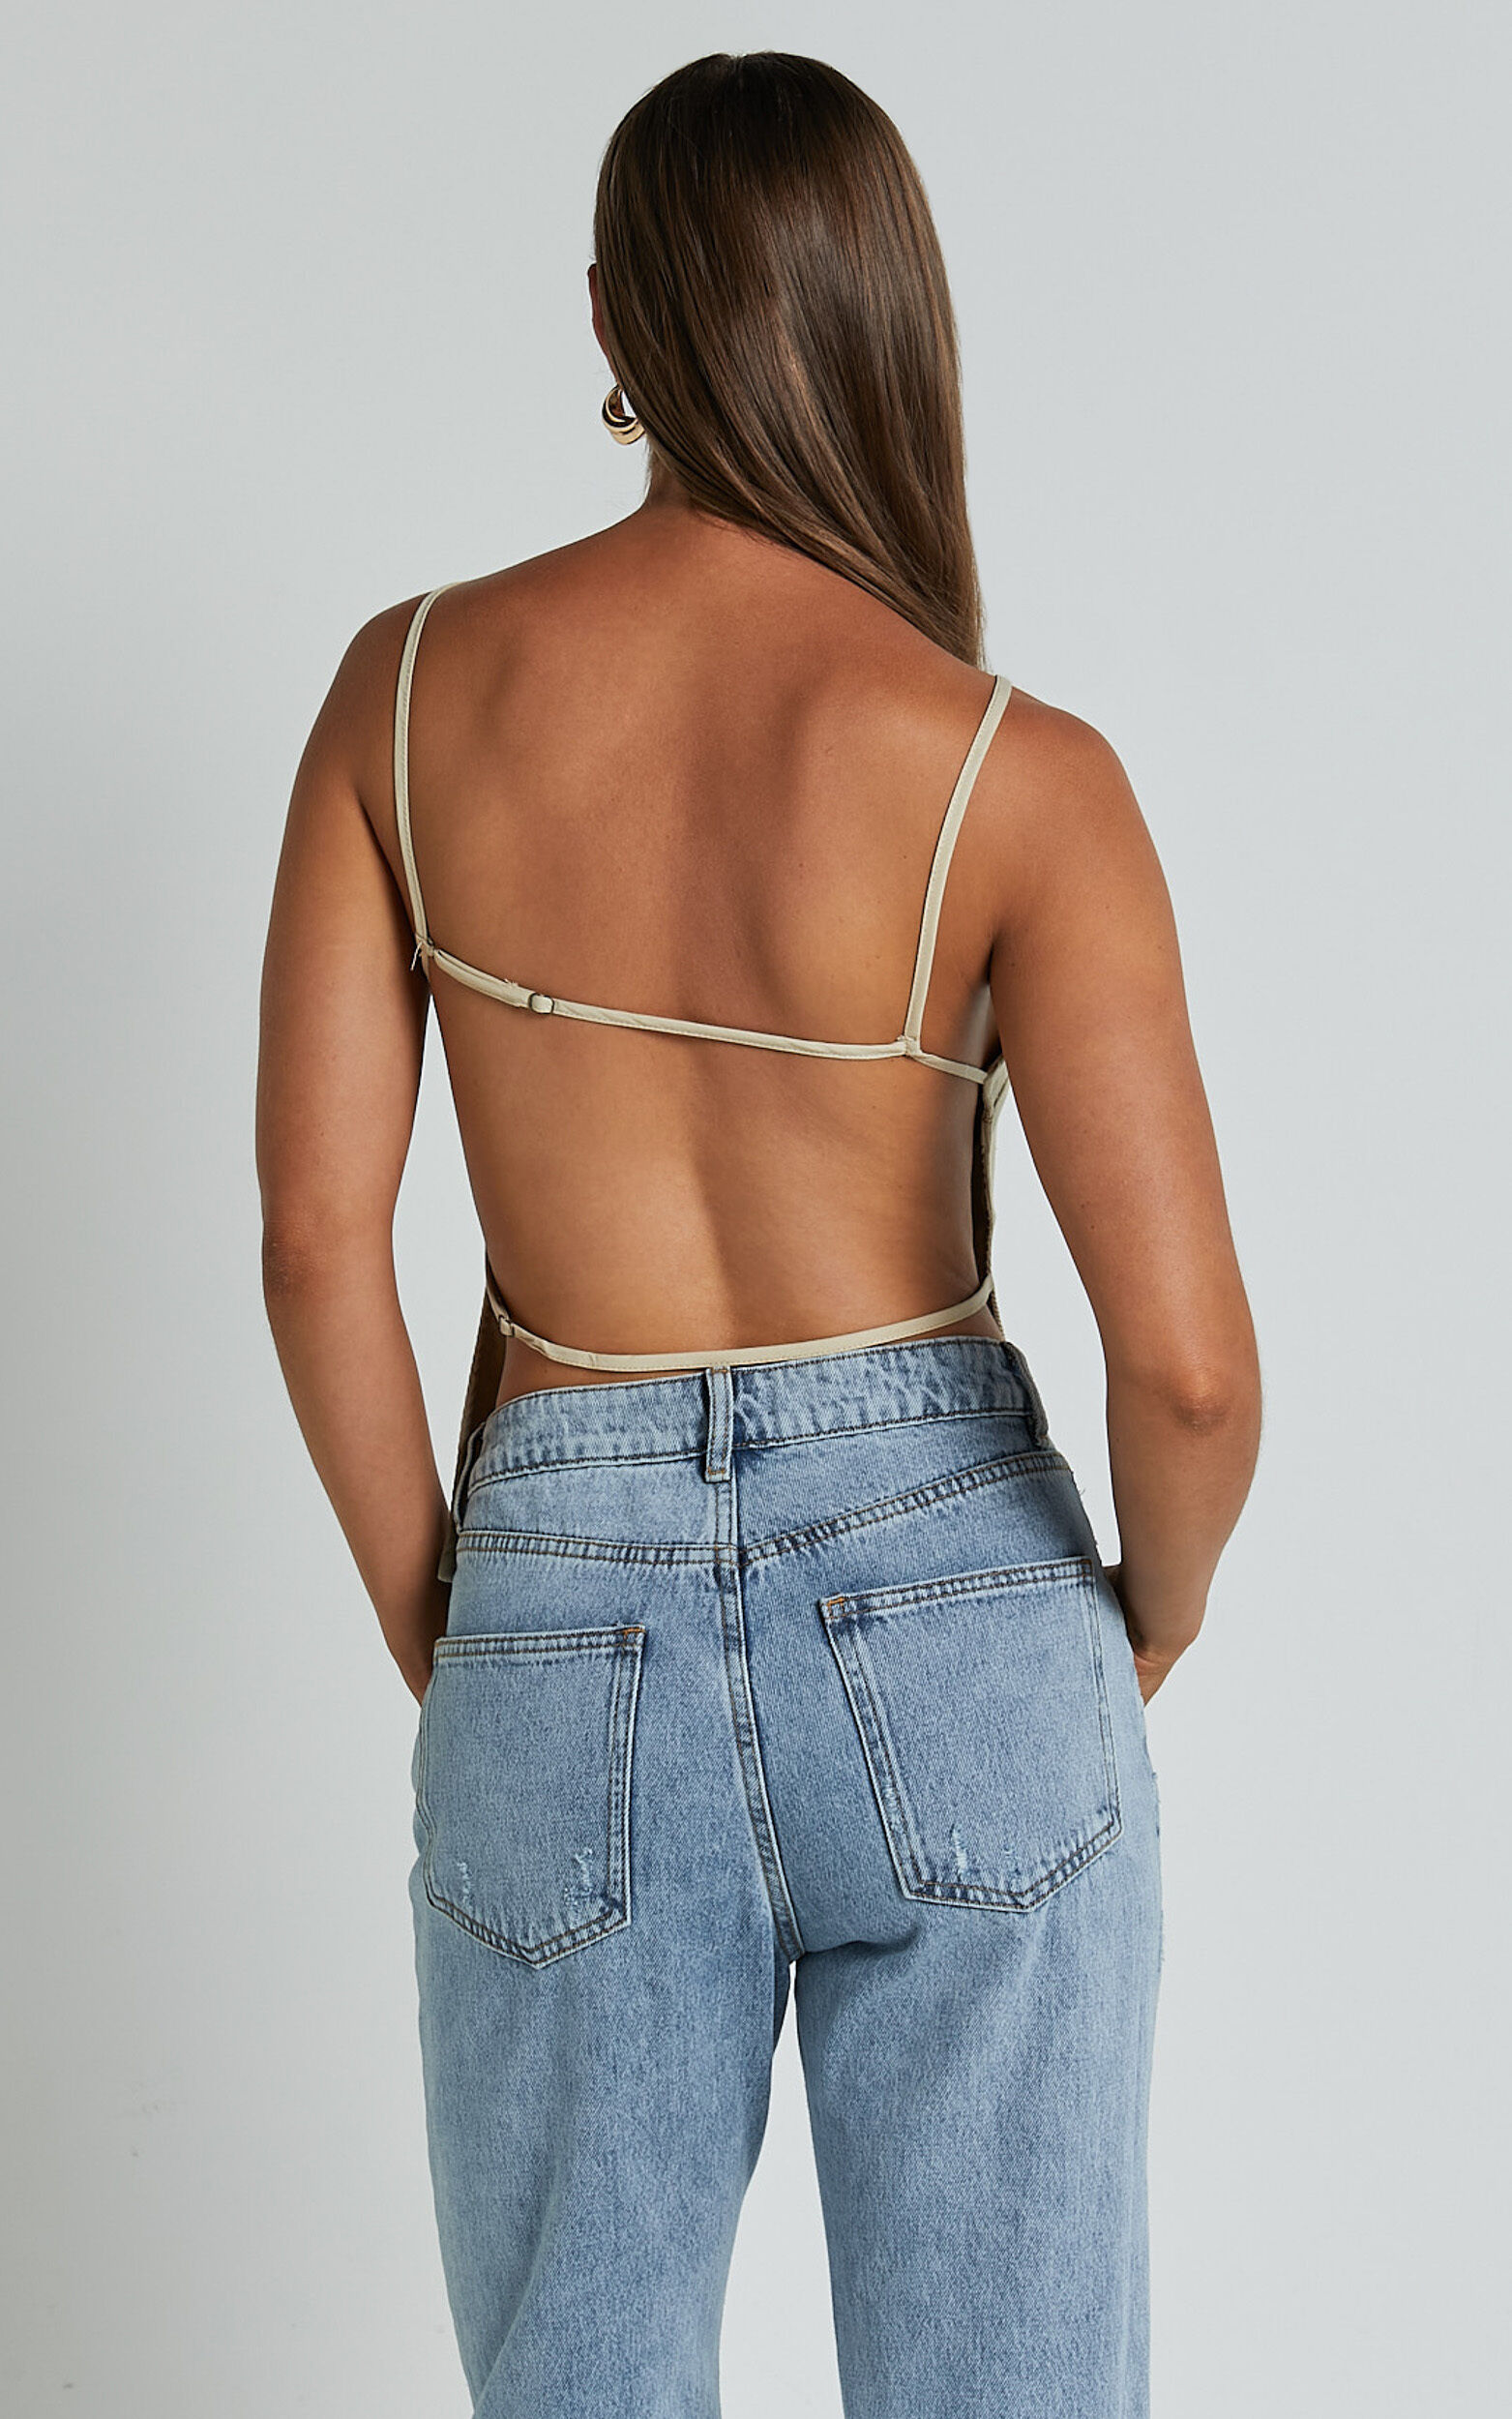 LIONESS - CAMILLE BACKLESS TOP in ECRU